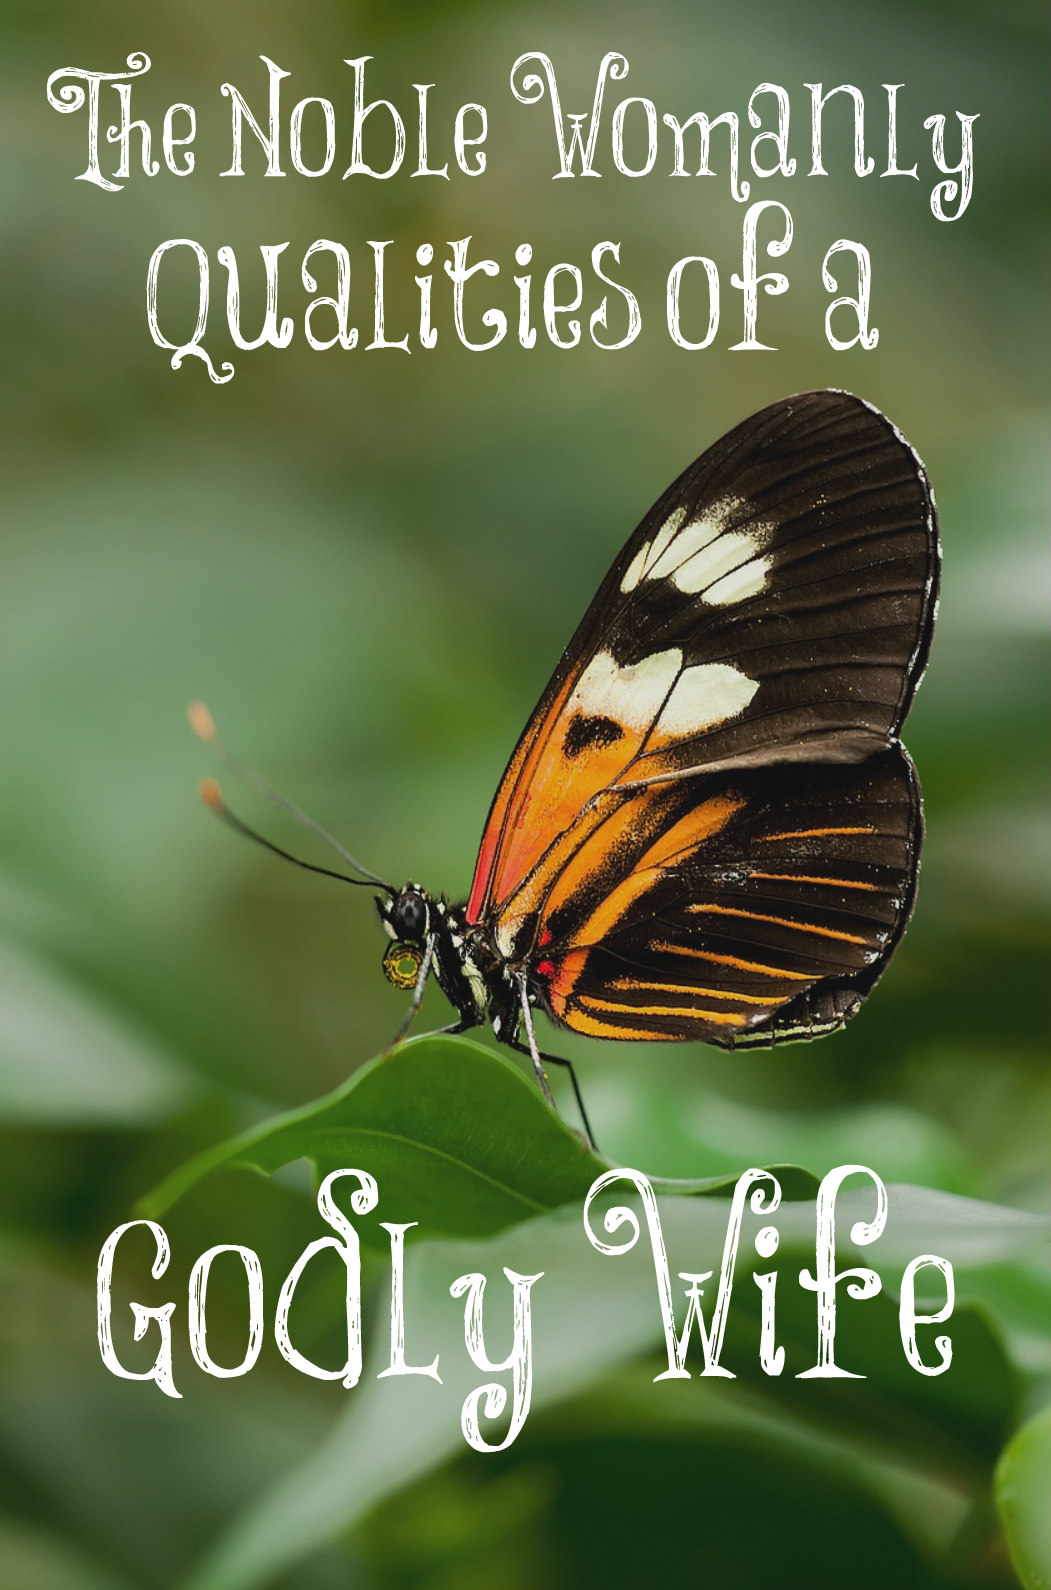 The Noble Womanly Qualities of a Godly Wife